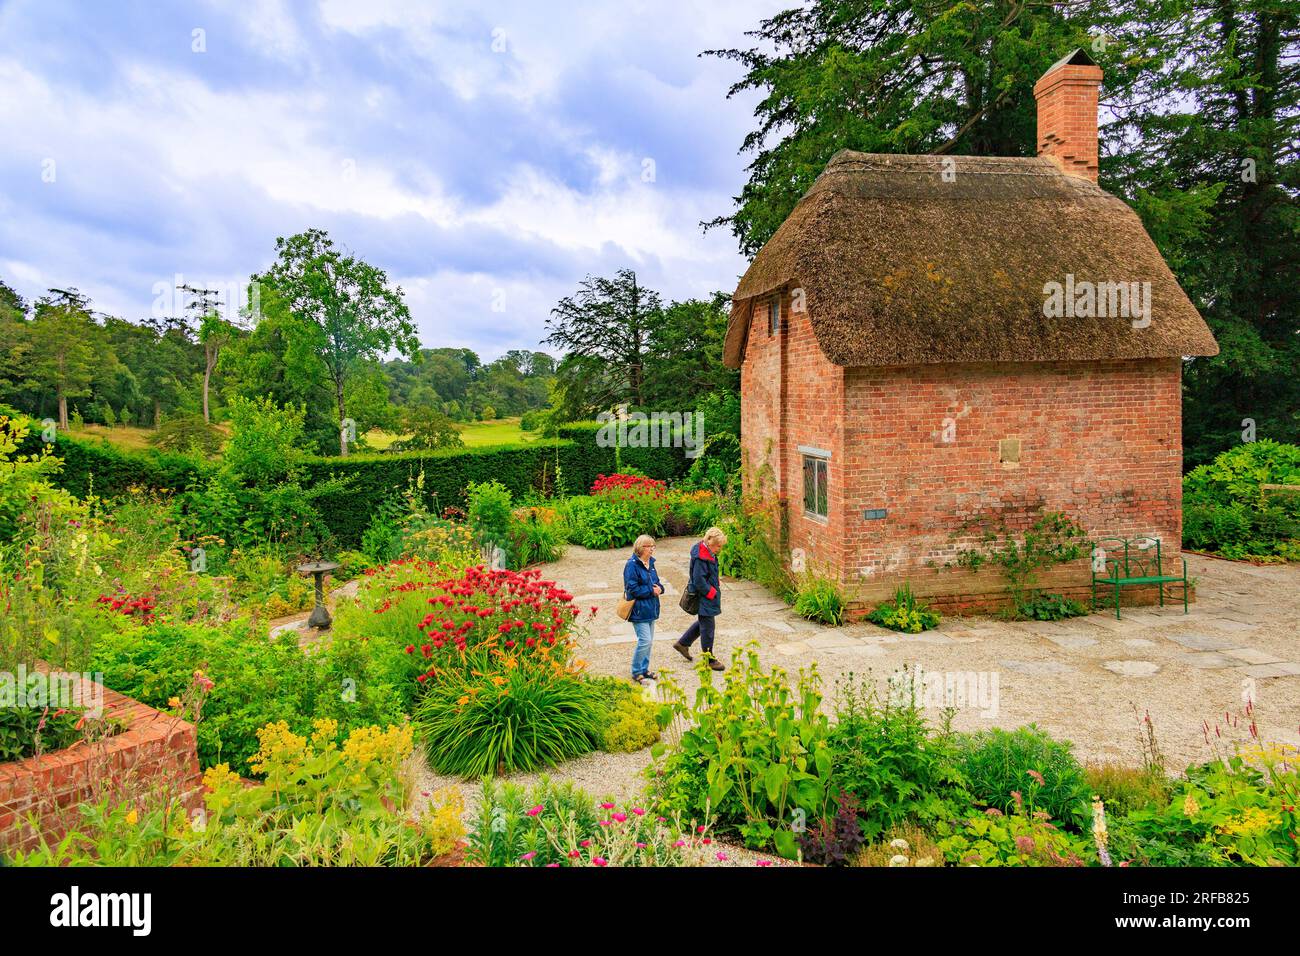 A small red brick cottage with thatched roof surrounded by colourful borders in the Cottage Garden at 'The Newt in Somerset', nr Bruton, England, UK Stock Photo